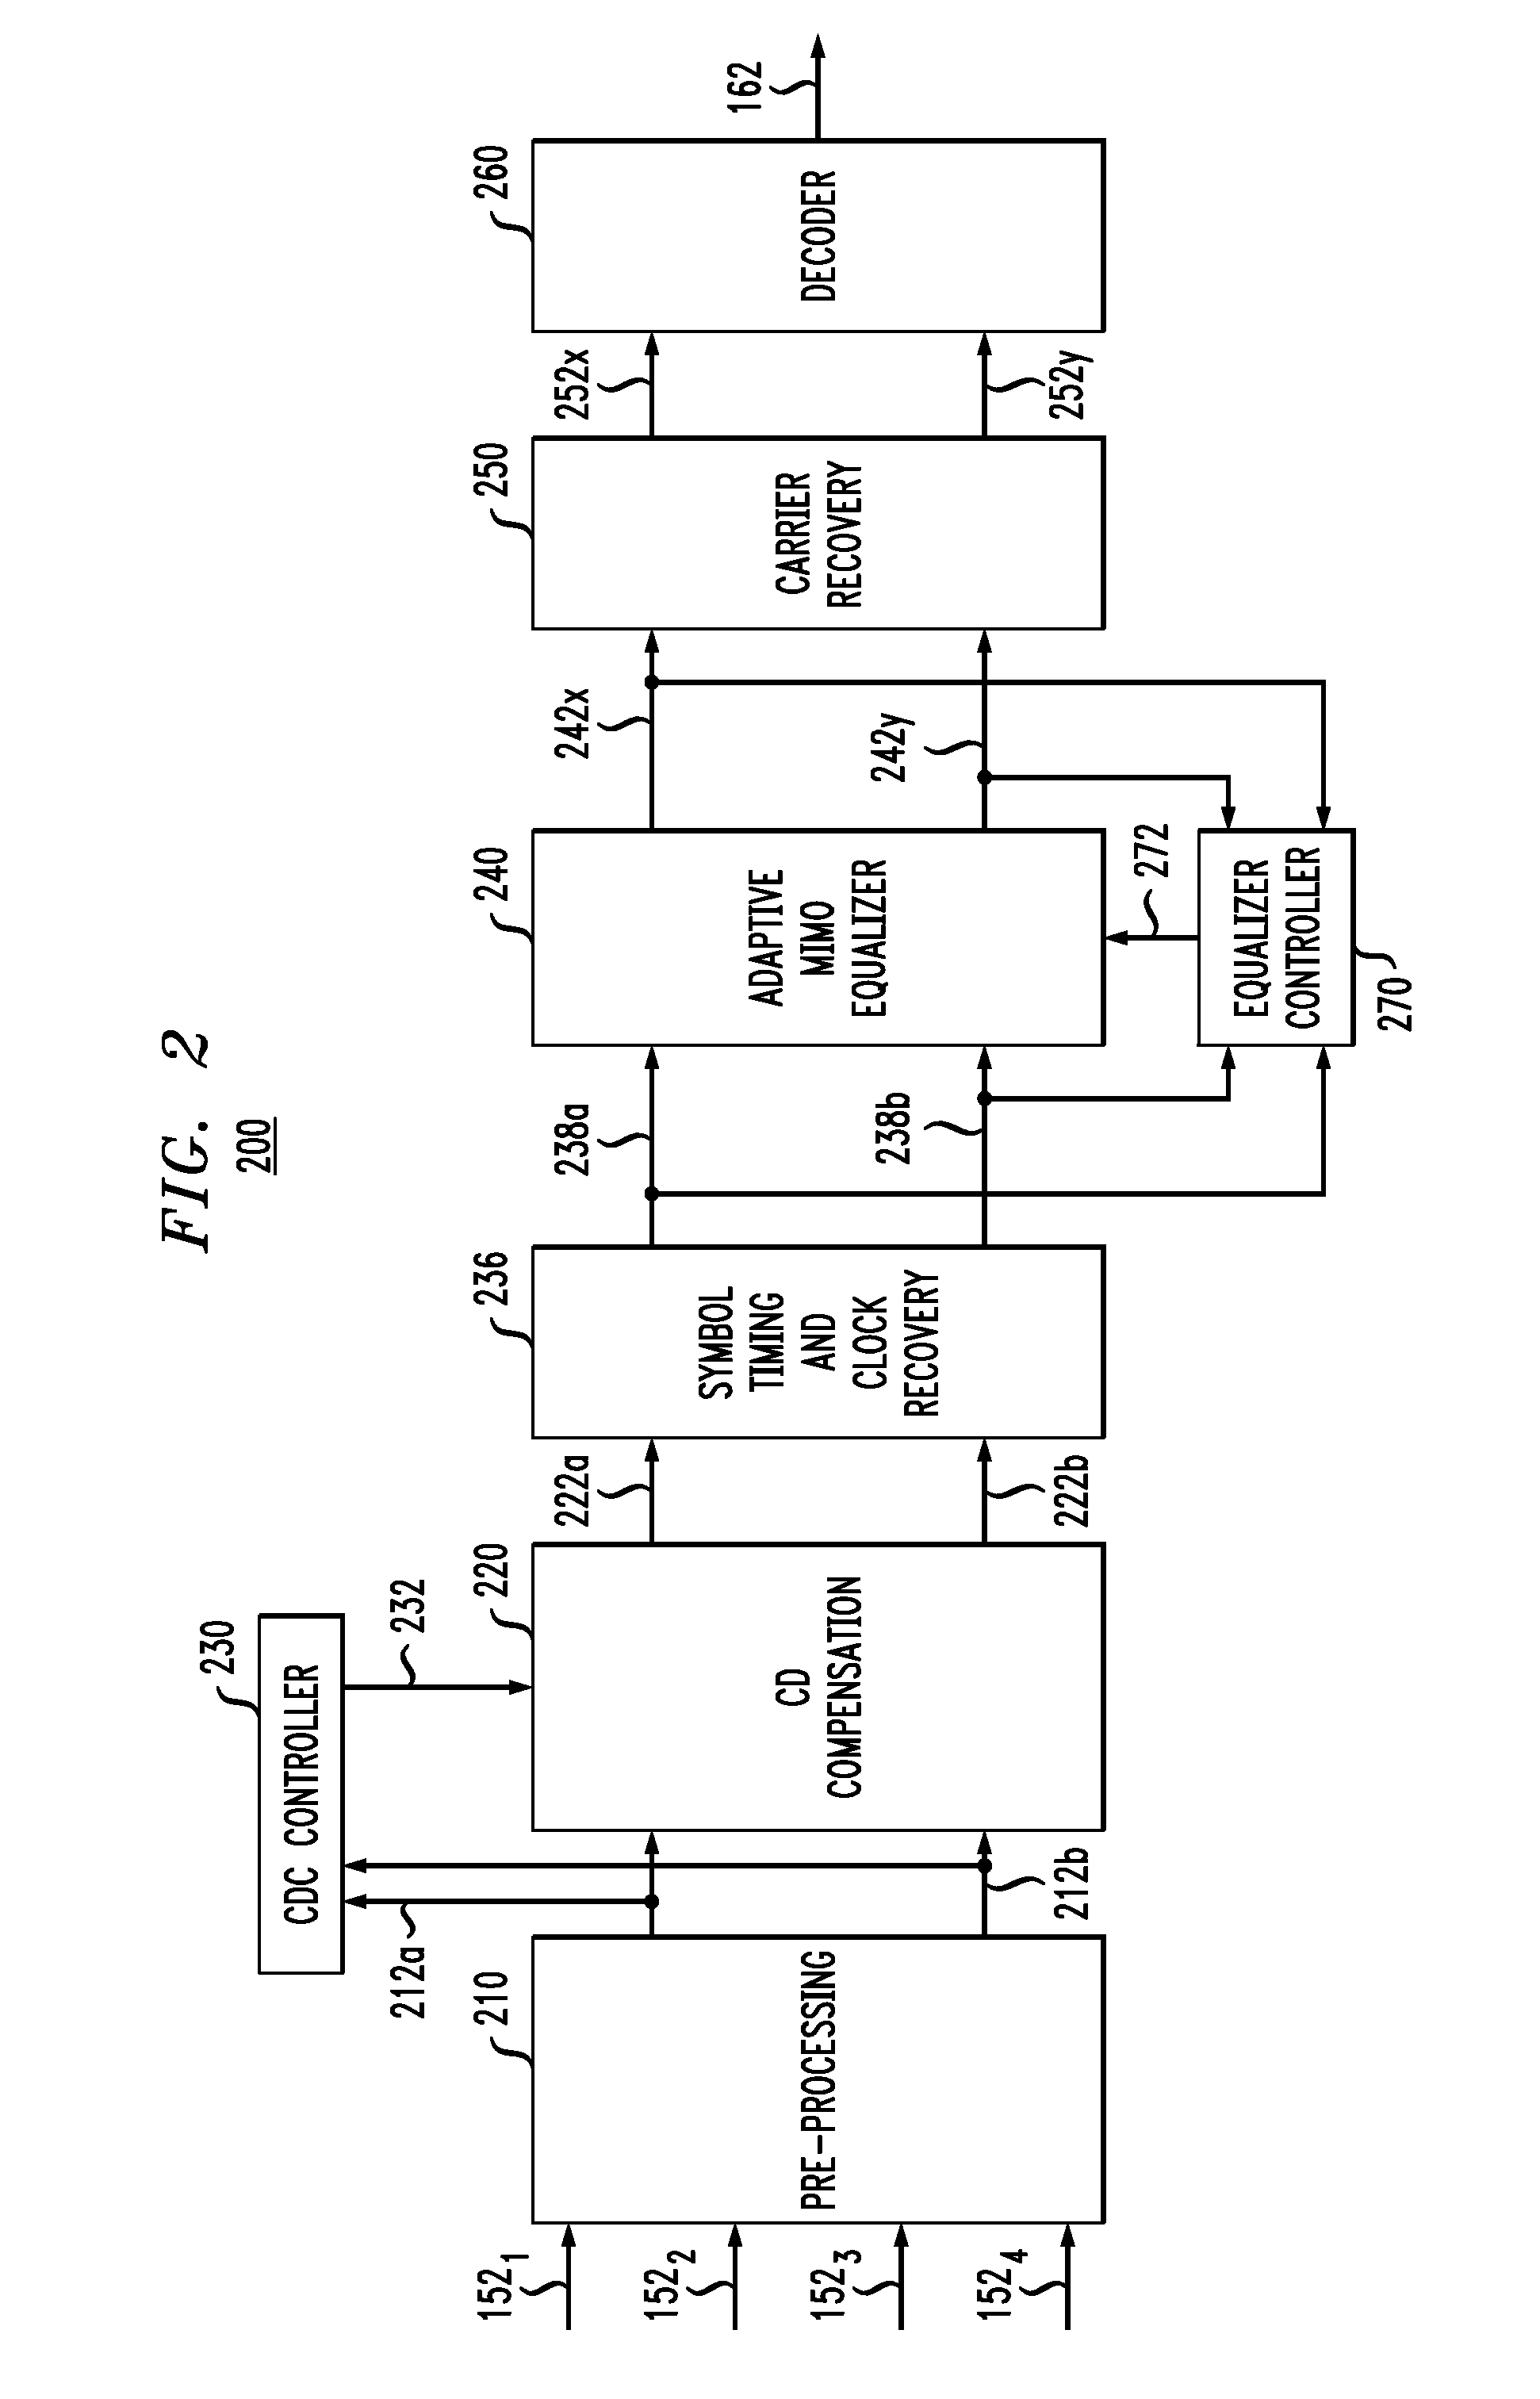 Demultiplexing processing for a receiver